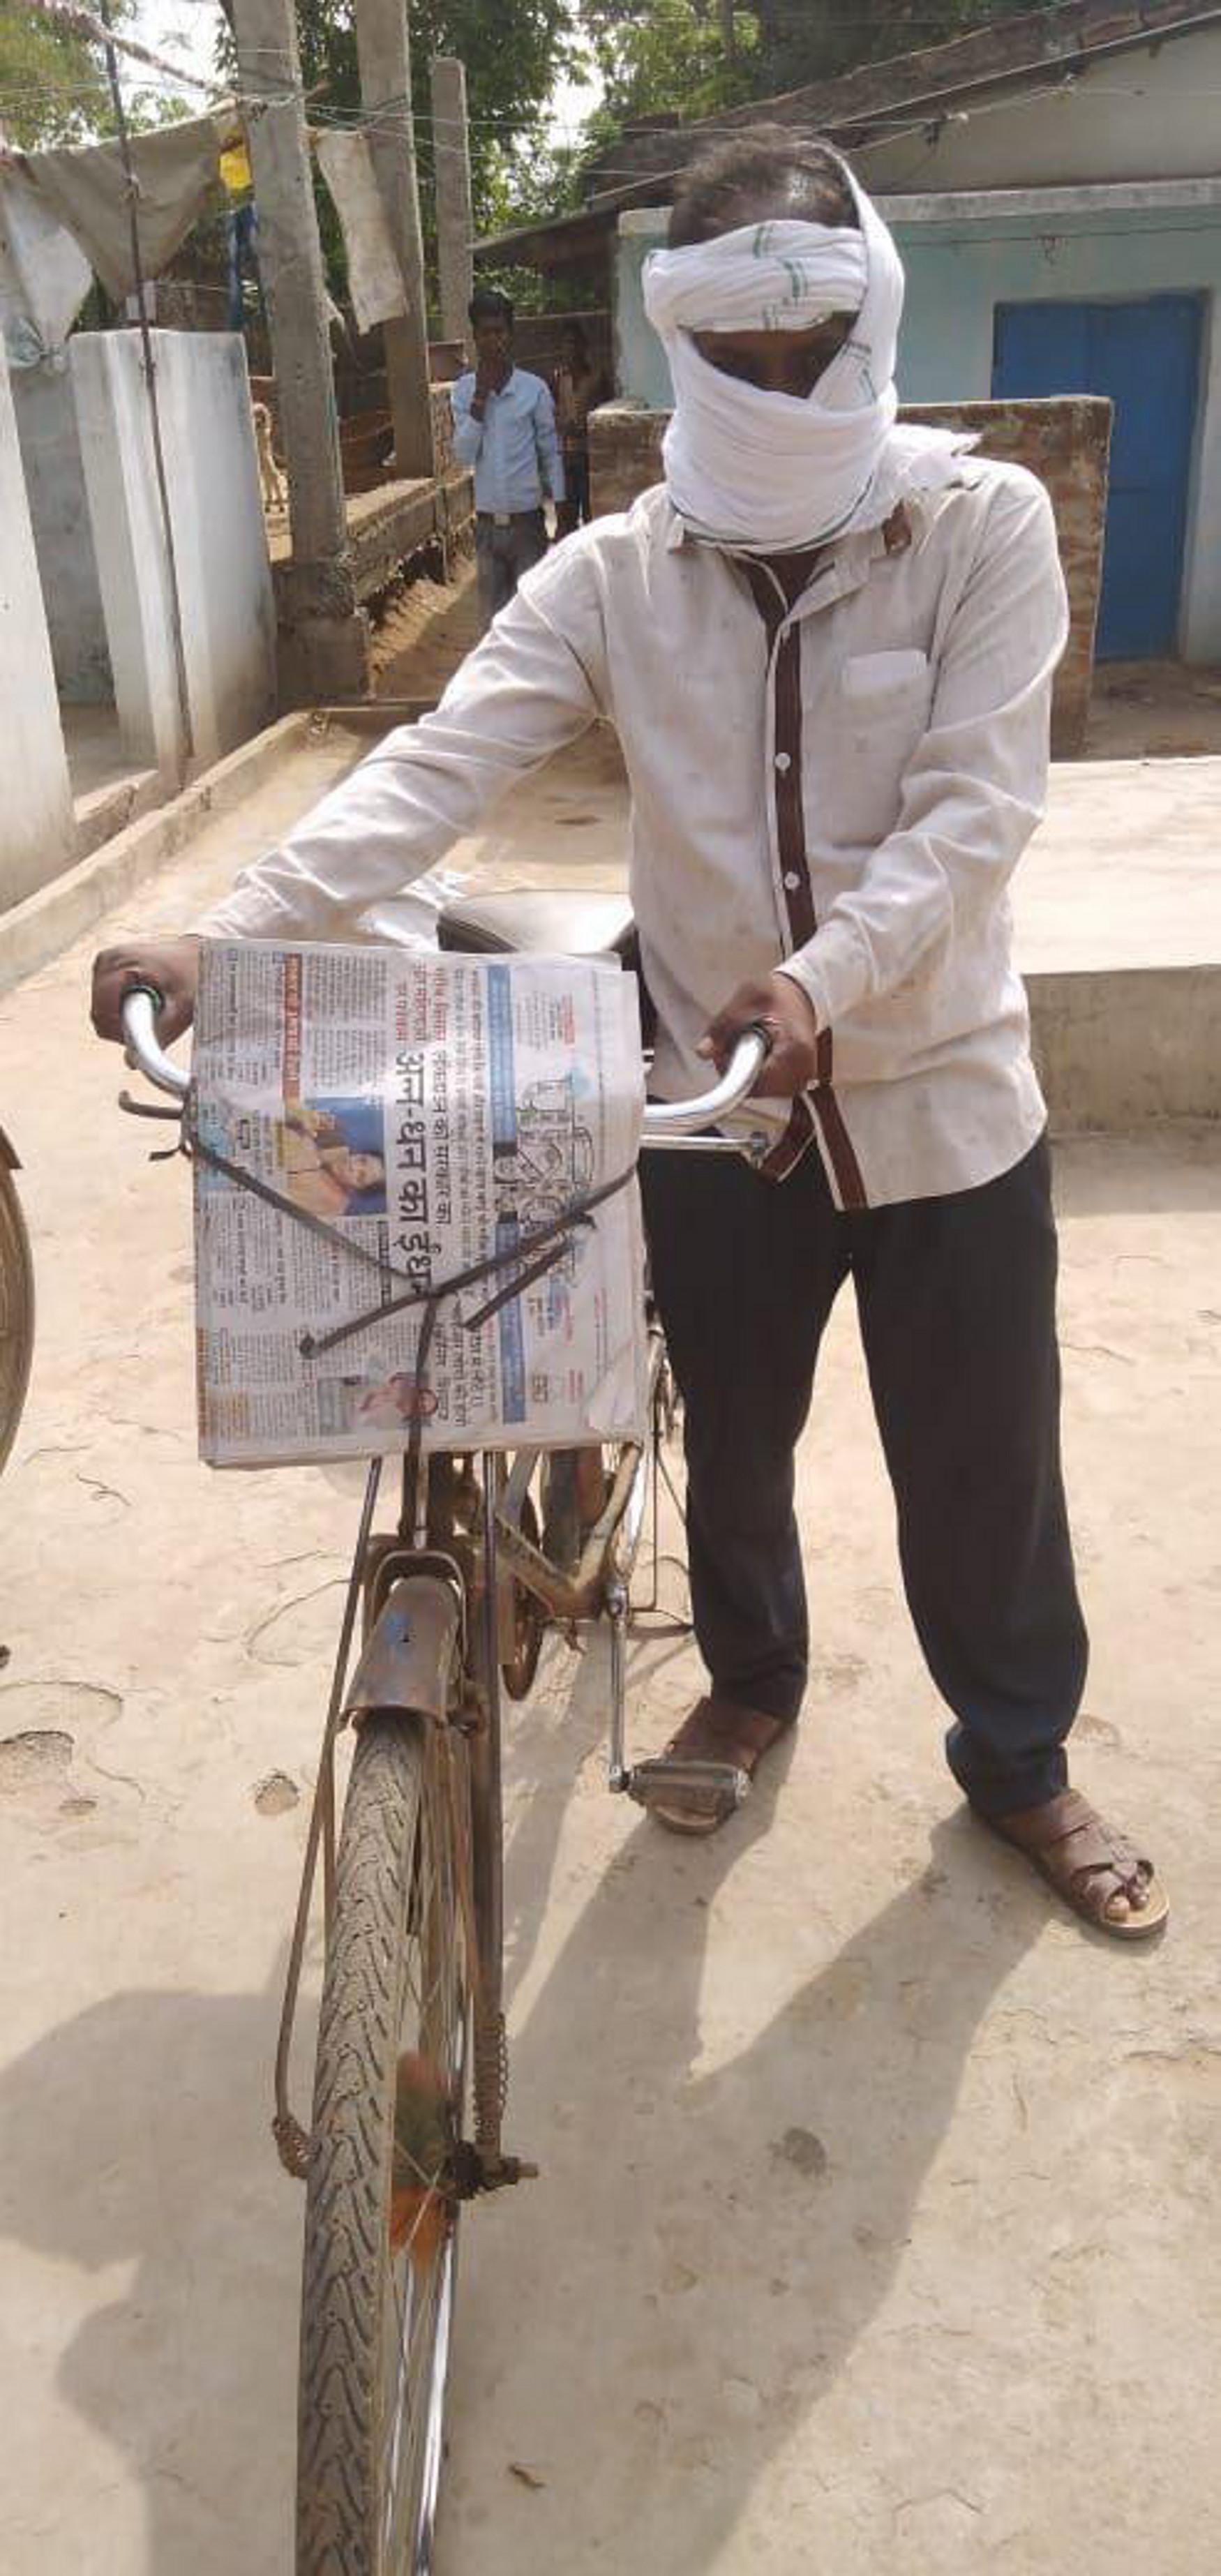 Salute to the spirit of those who deliver the newspaper to the readers